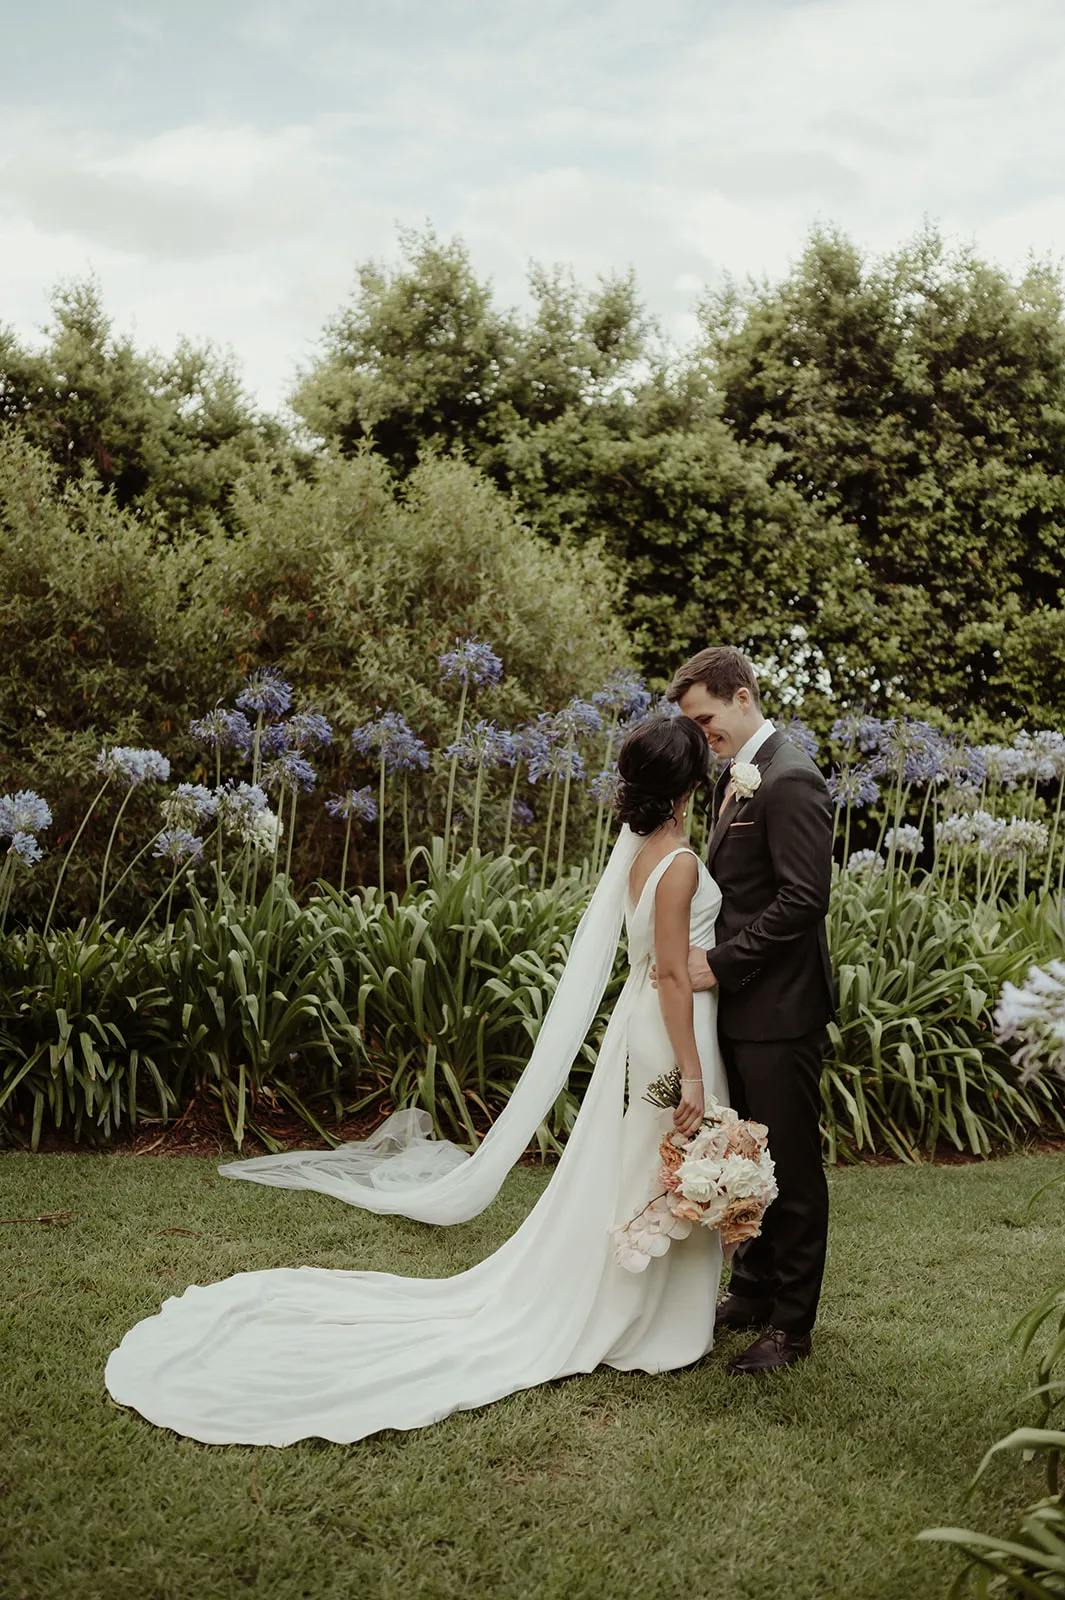 A bride and groom stand together in a lush garden, surrounded by greenery and purple flowers. The bride wears a long white dress with a flowing train and veil, holding a bouquet of flowers. The groom is dressed in a black suit. They gaze into each other's eyes lovingly.